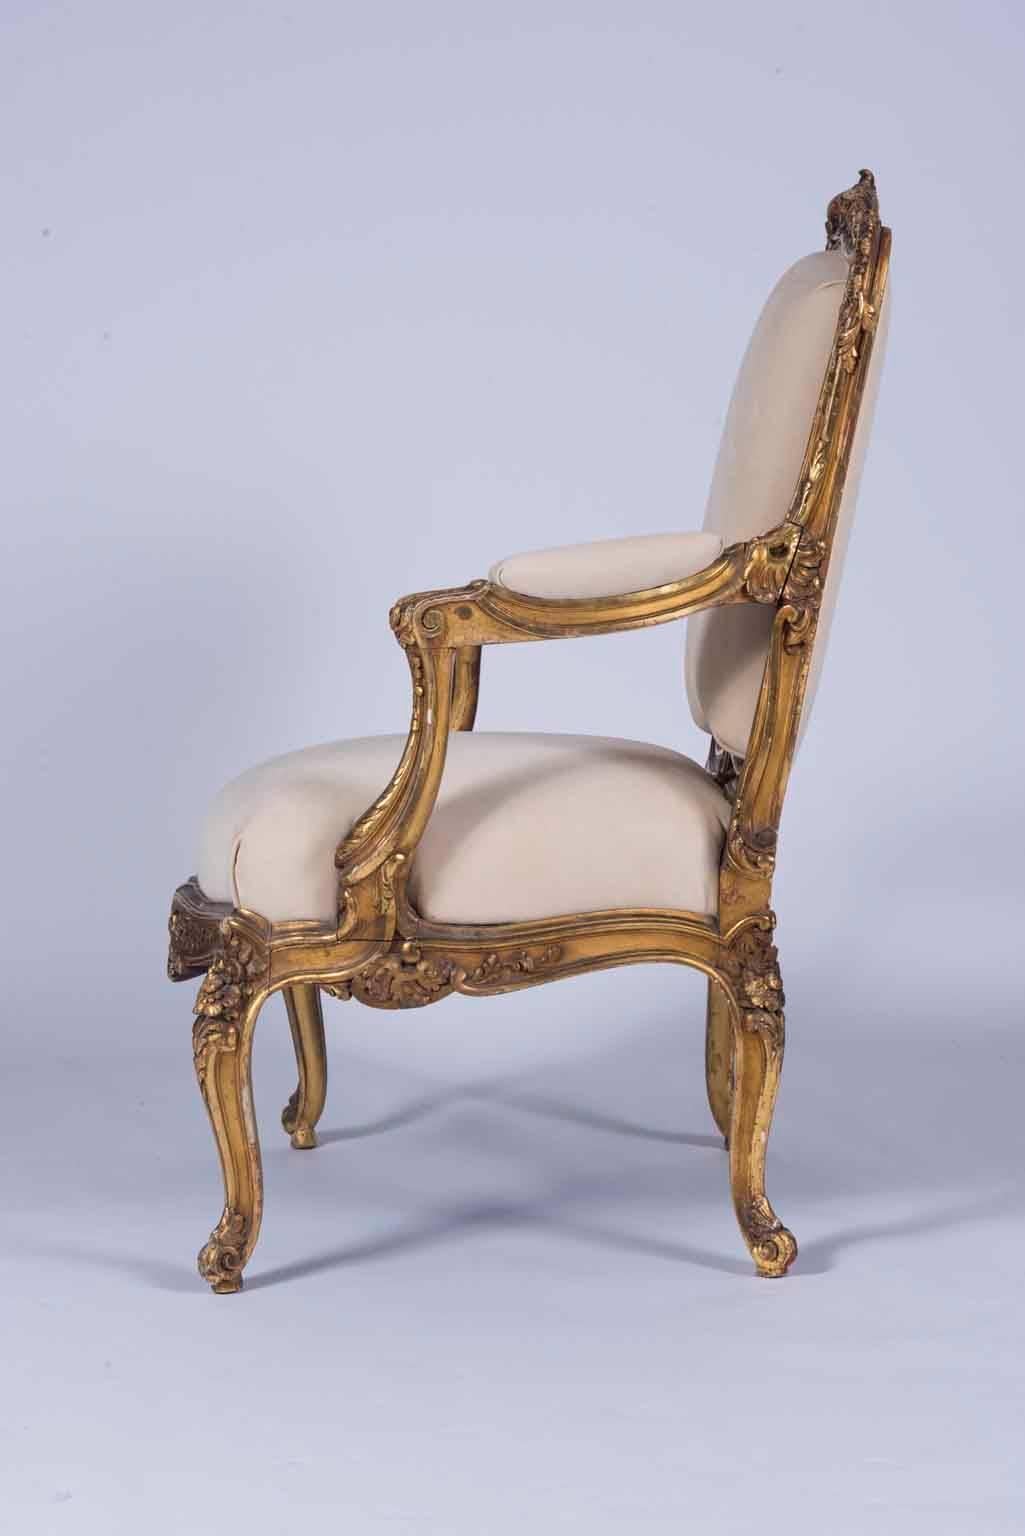 An ornately carved pair of 20th century Louis XV giltwood armchairs newly upholstered in a creamy ecru nubuck Italian leather.